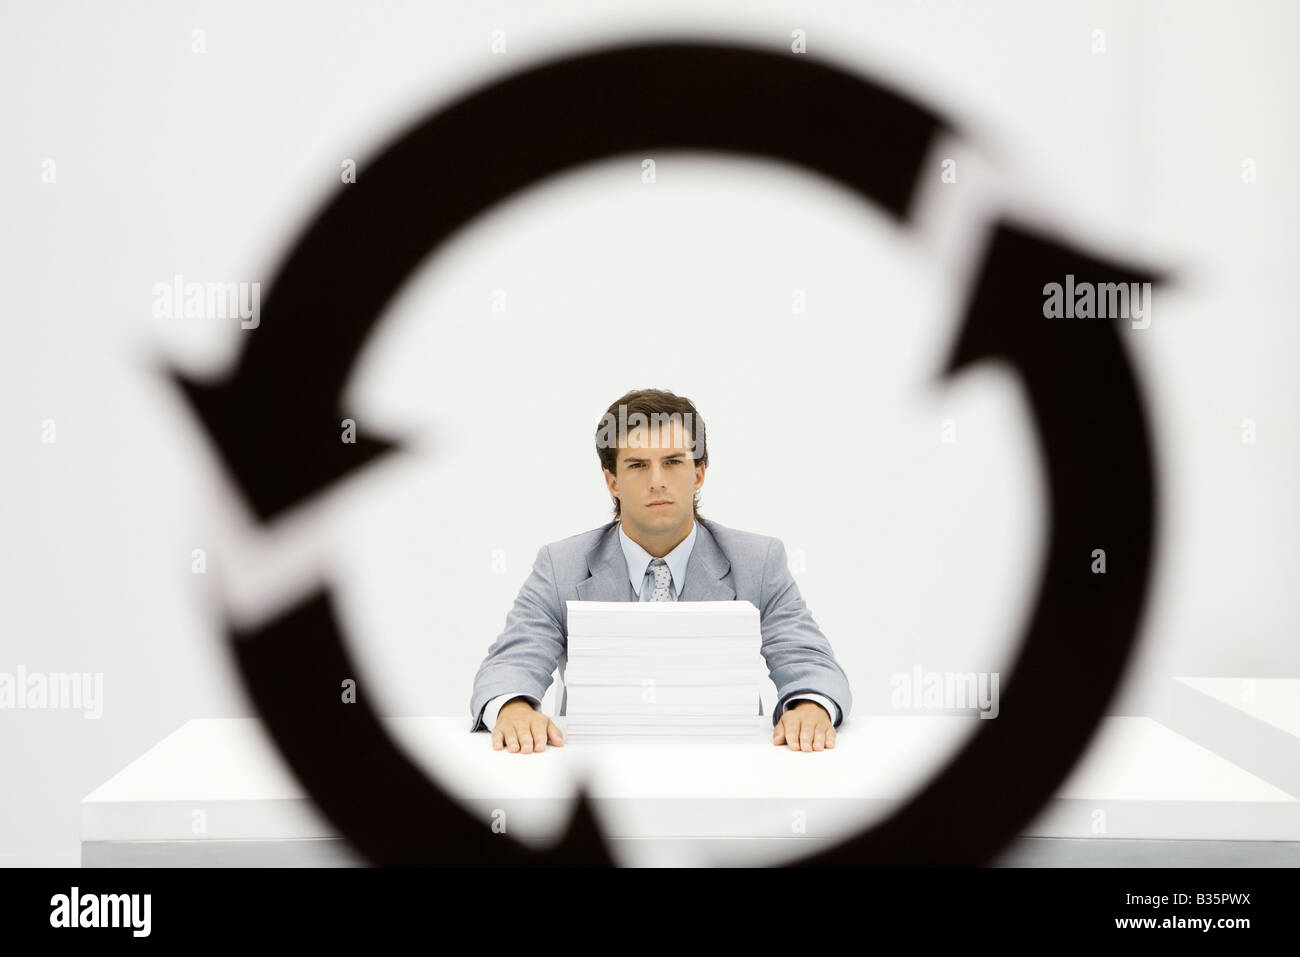 Professional sitting at desk with large stack of paper, circular arrow symbol in foreground Stock Photo